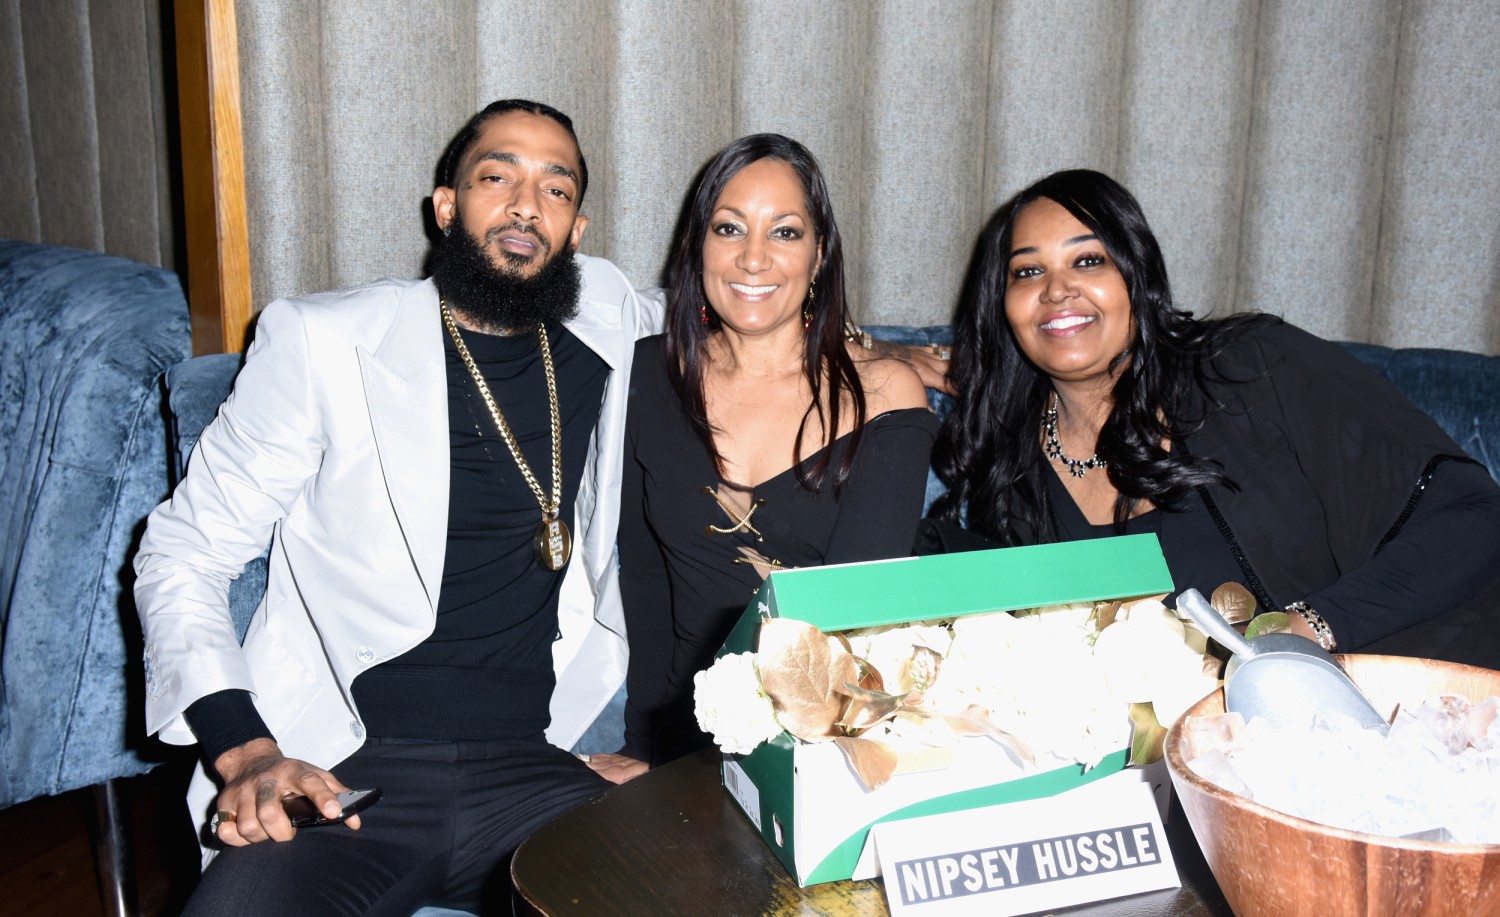 Nipsey Hussle's mother shares heartfelt message in wake of his death